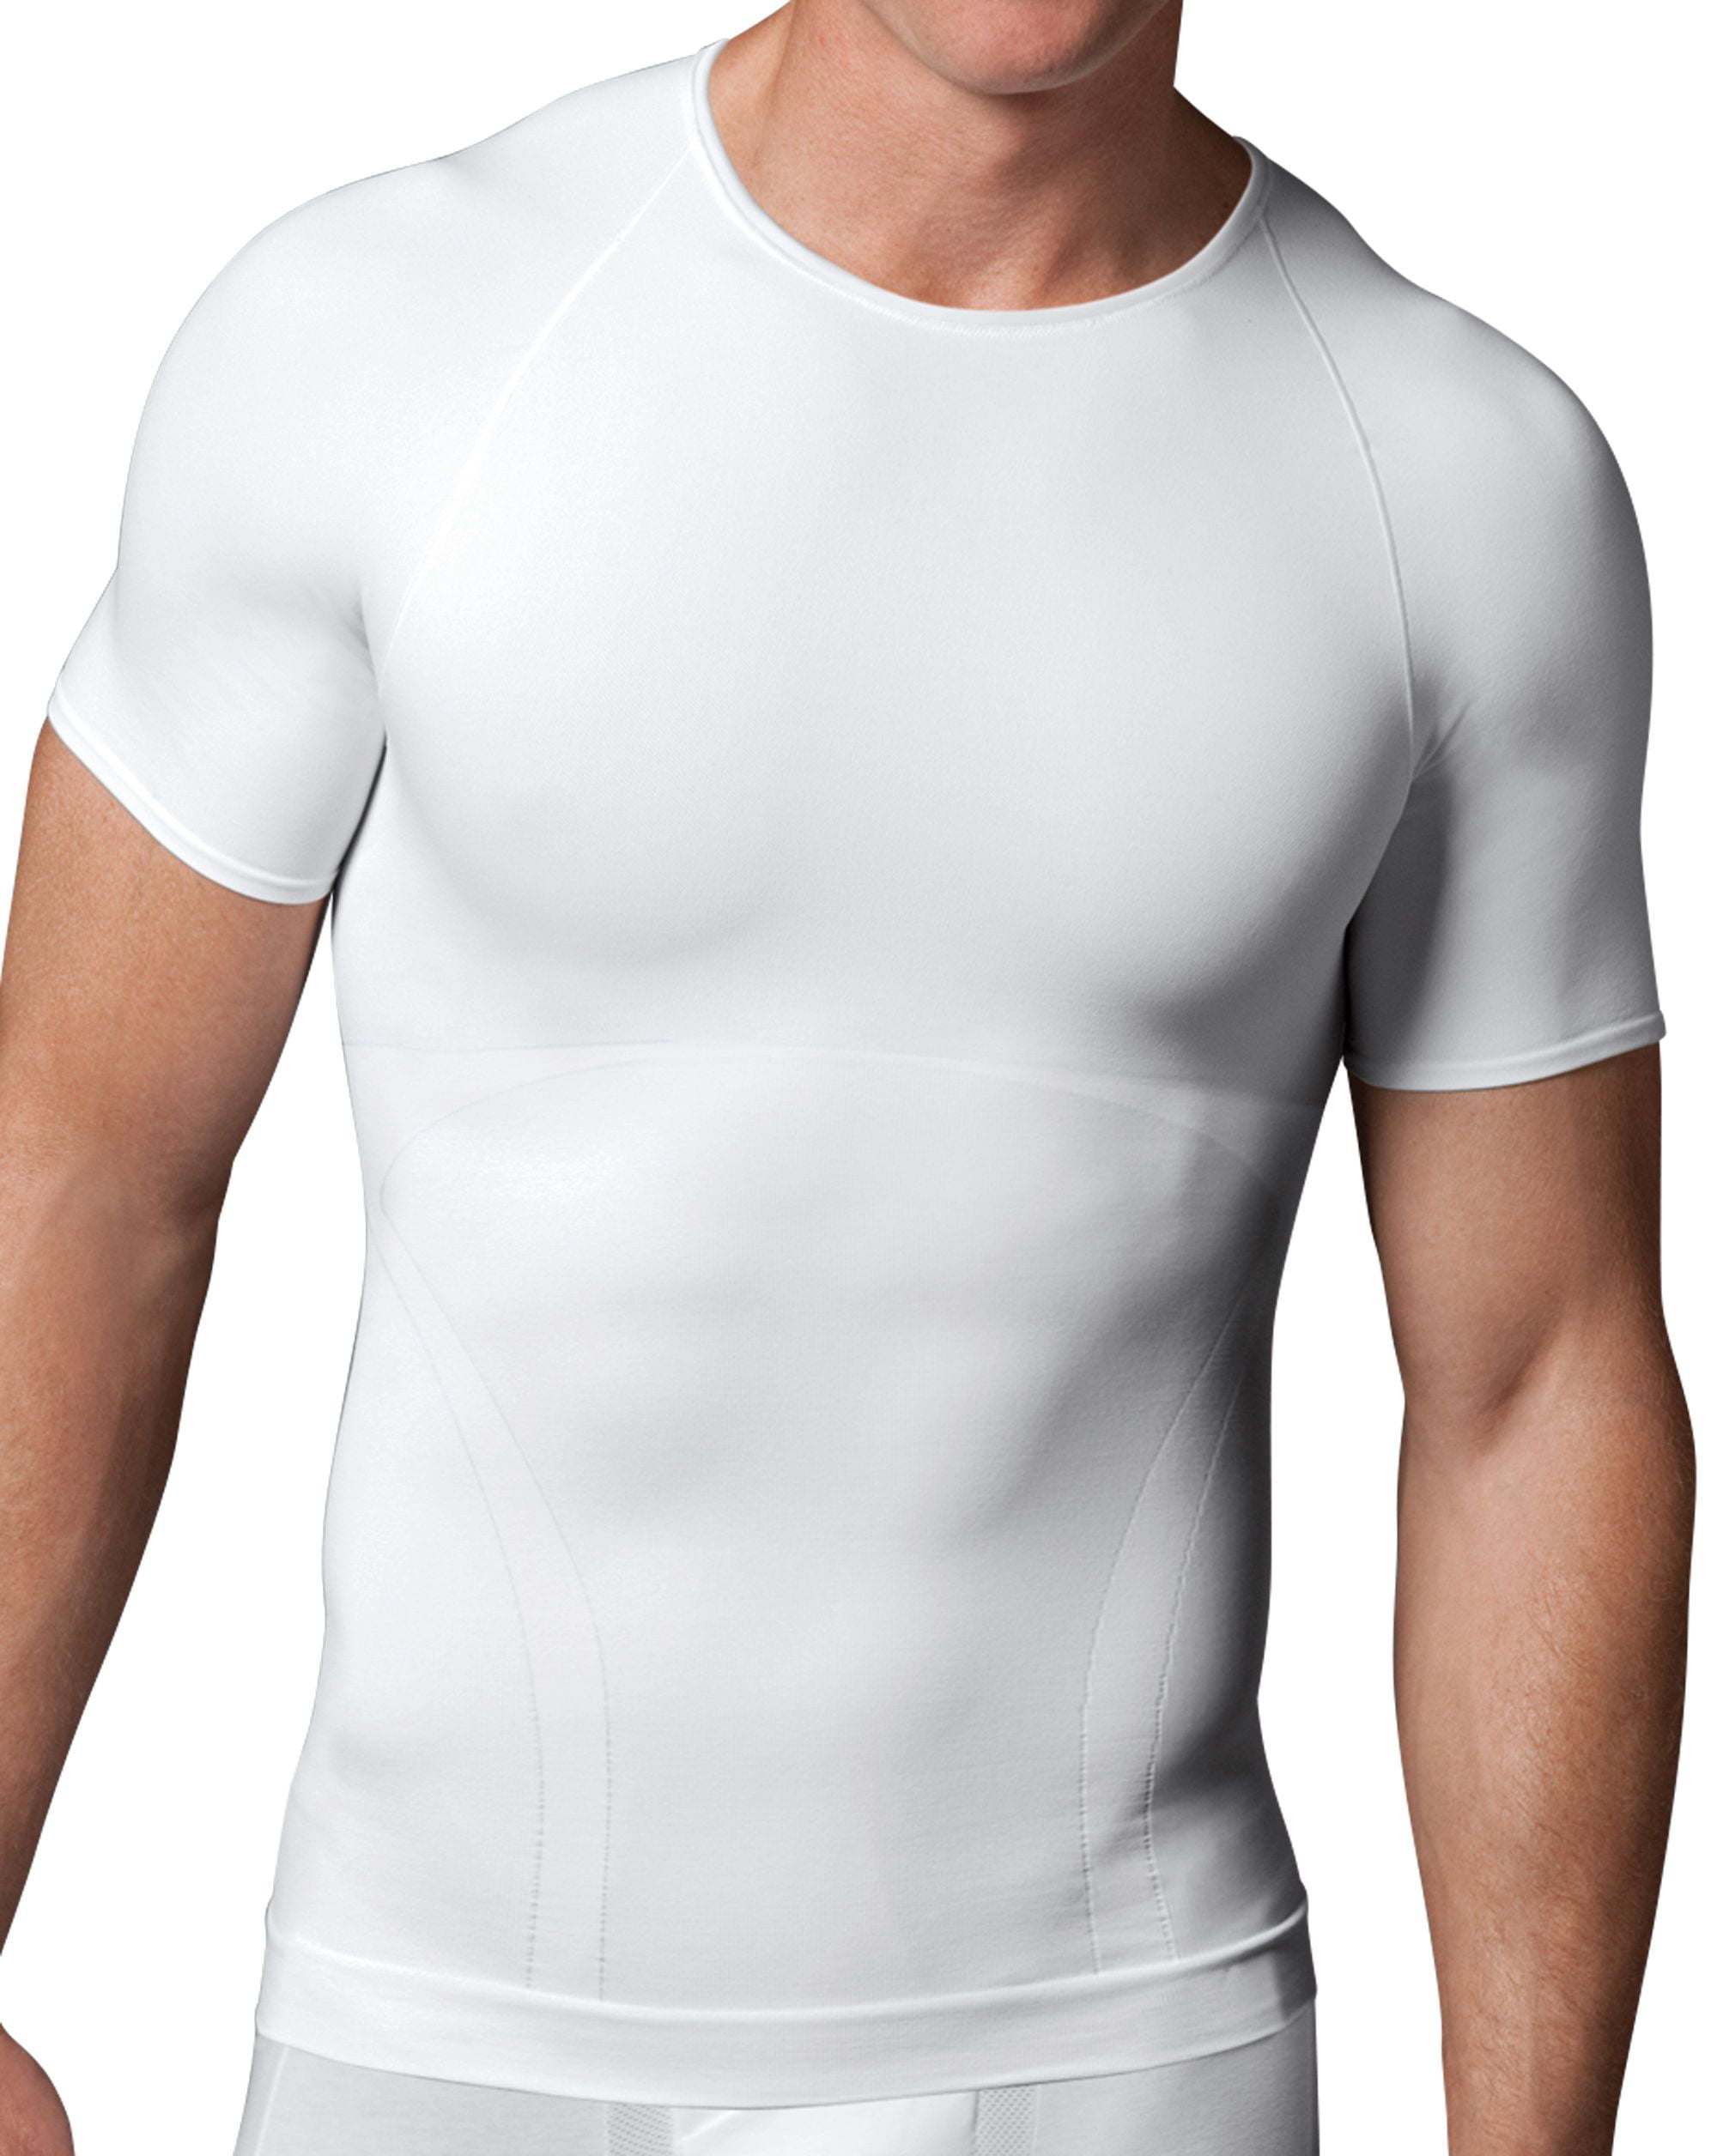 Spanx - Spanx NEW White Mens Size XL Short Sleeve Compression Tee T ...